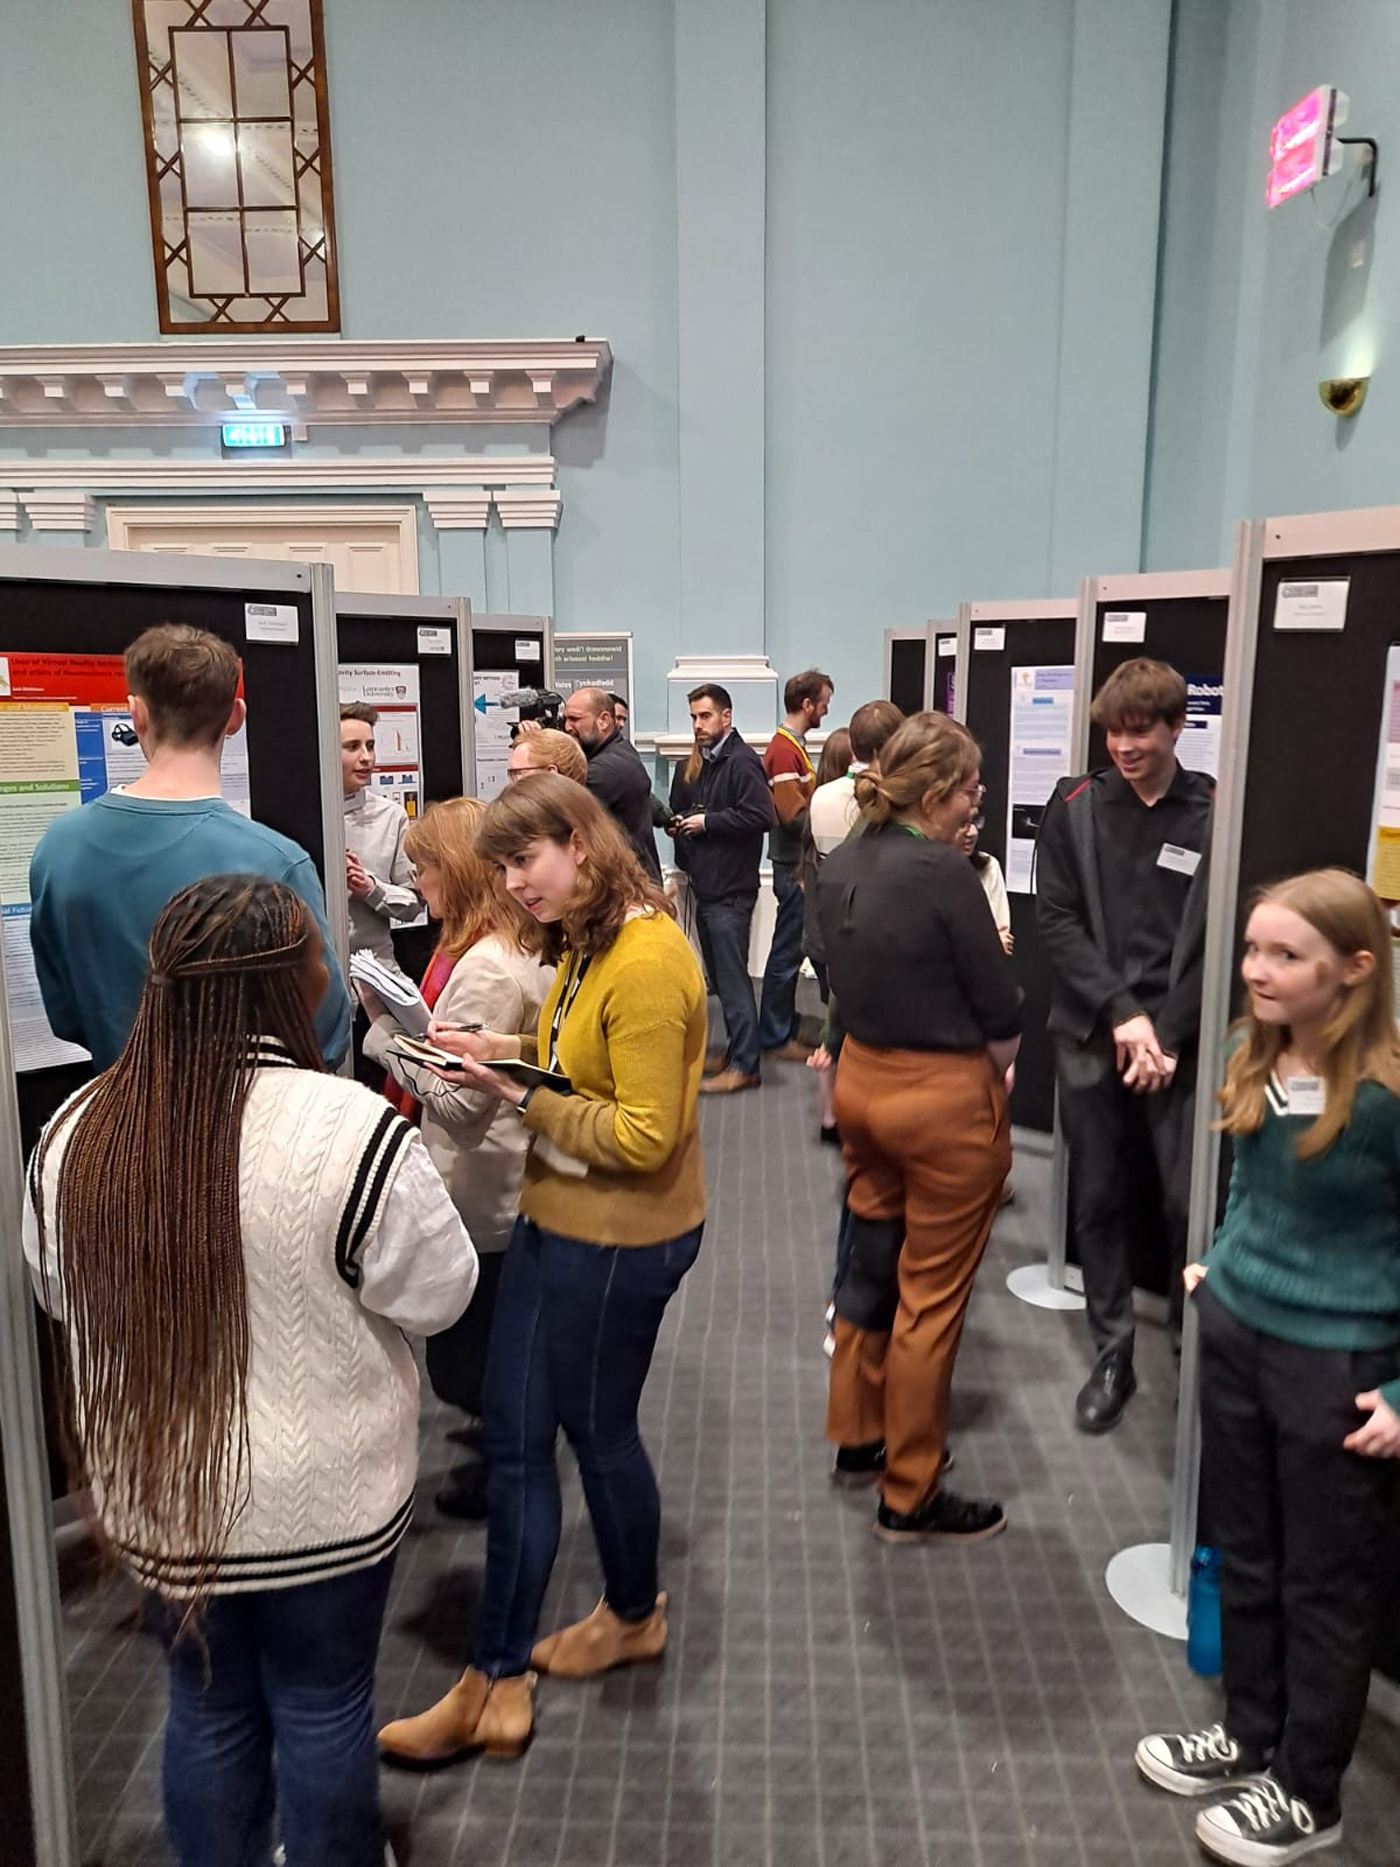 The finalists show their research to members of the public and to the judging panel